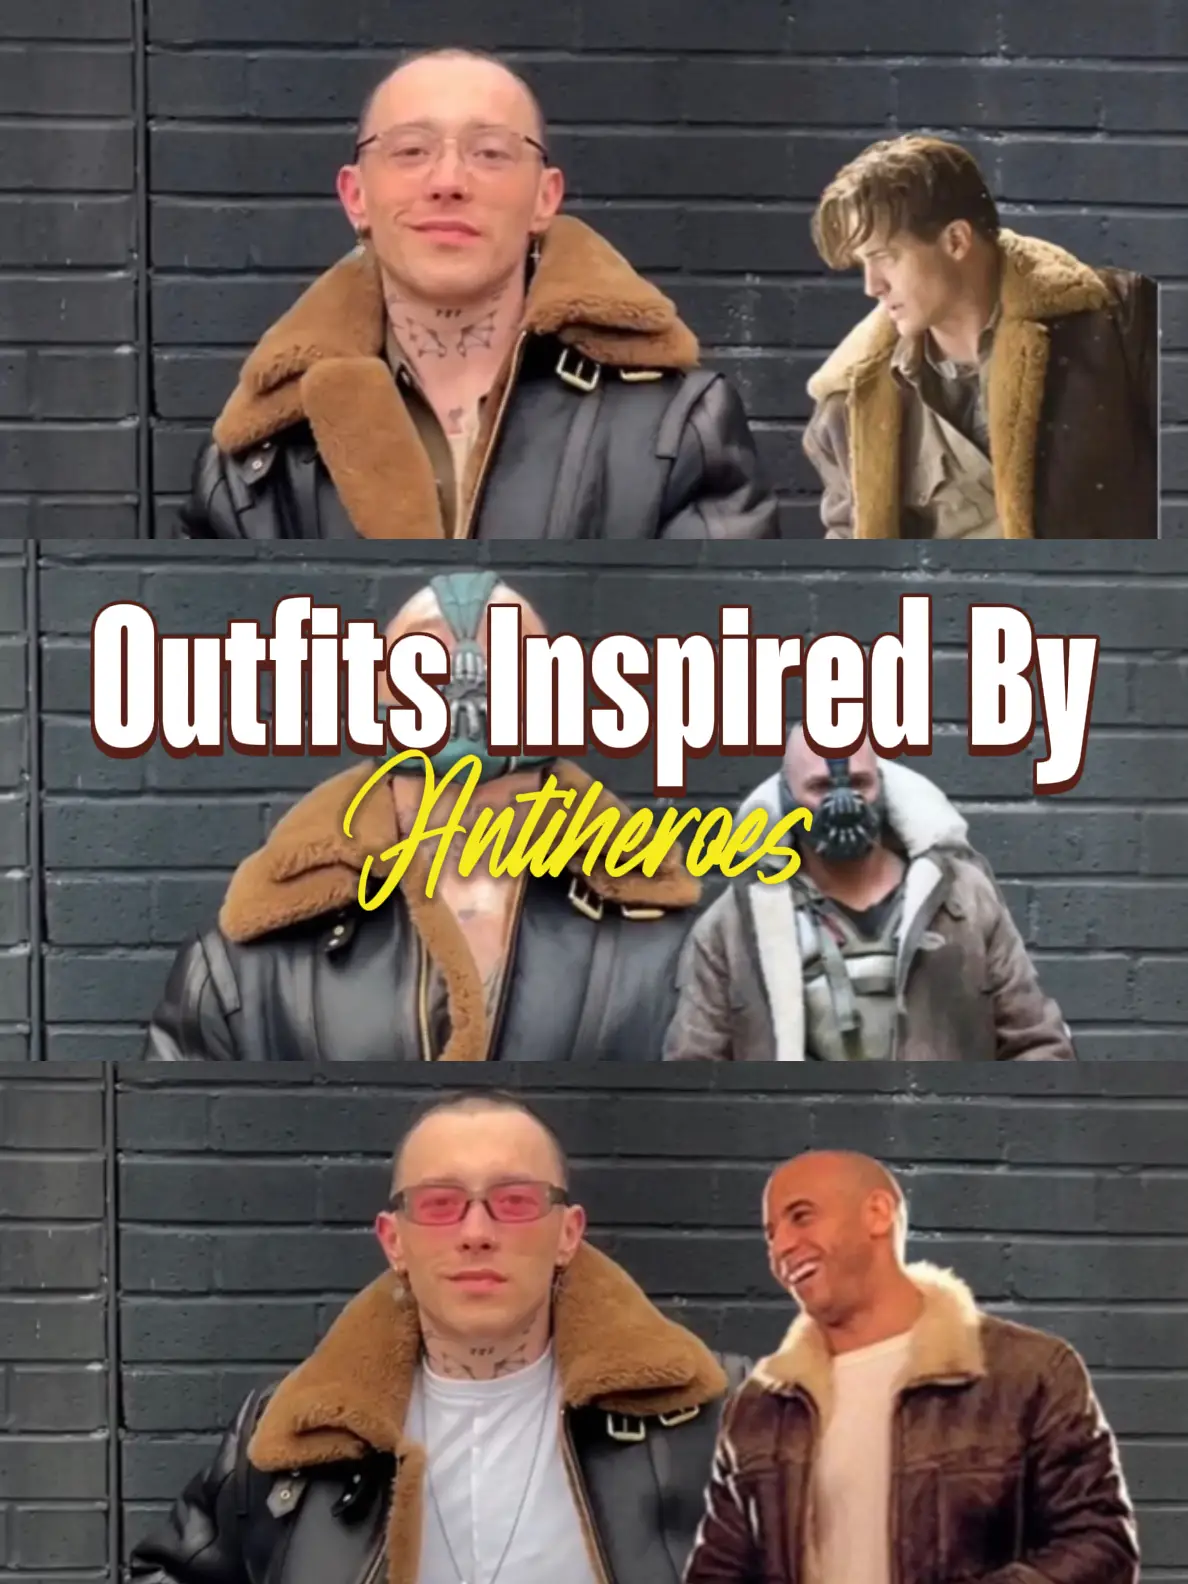 Outfits inspired by THE SAME Be Mike | Gallery Dont | JACKET by Lemon8 posted